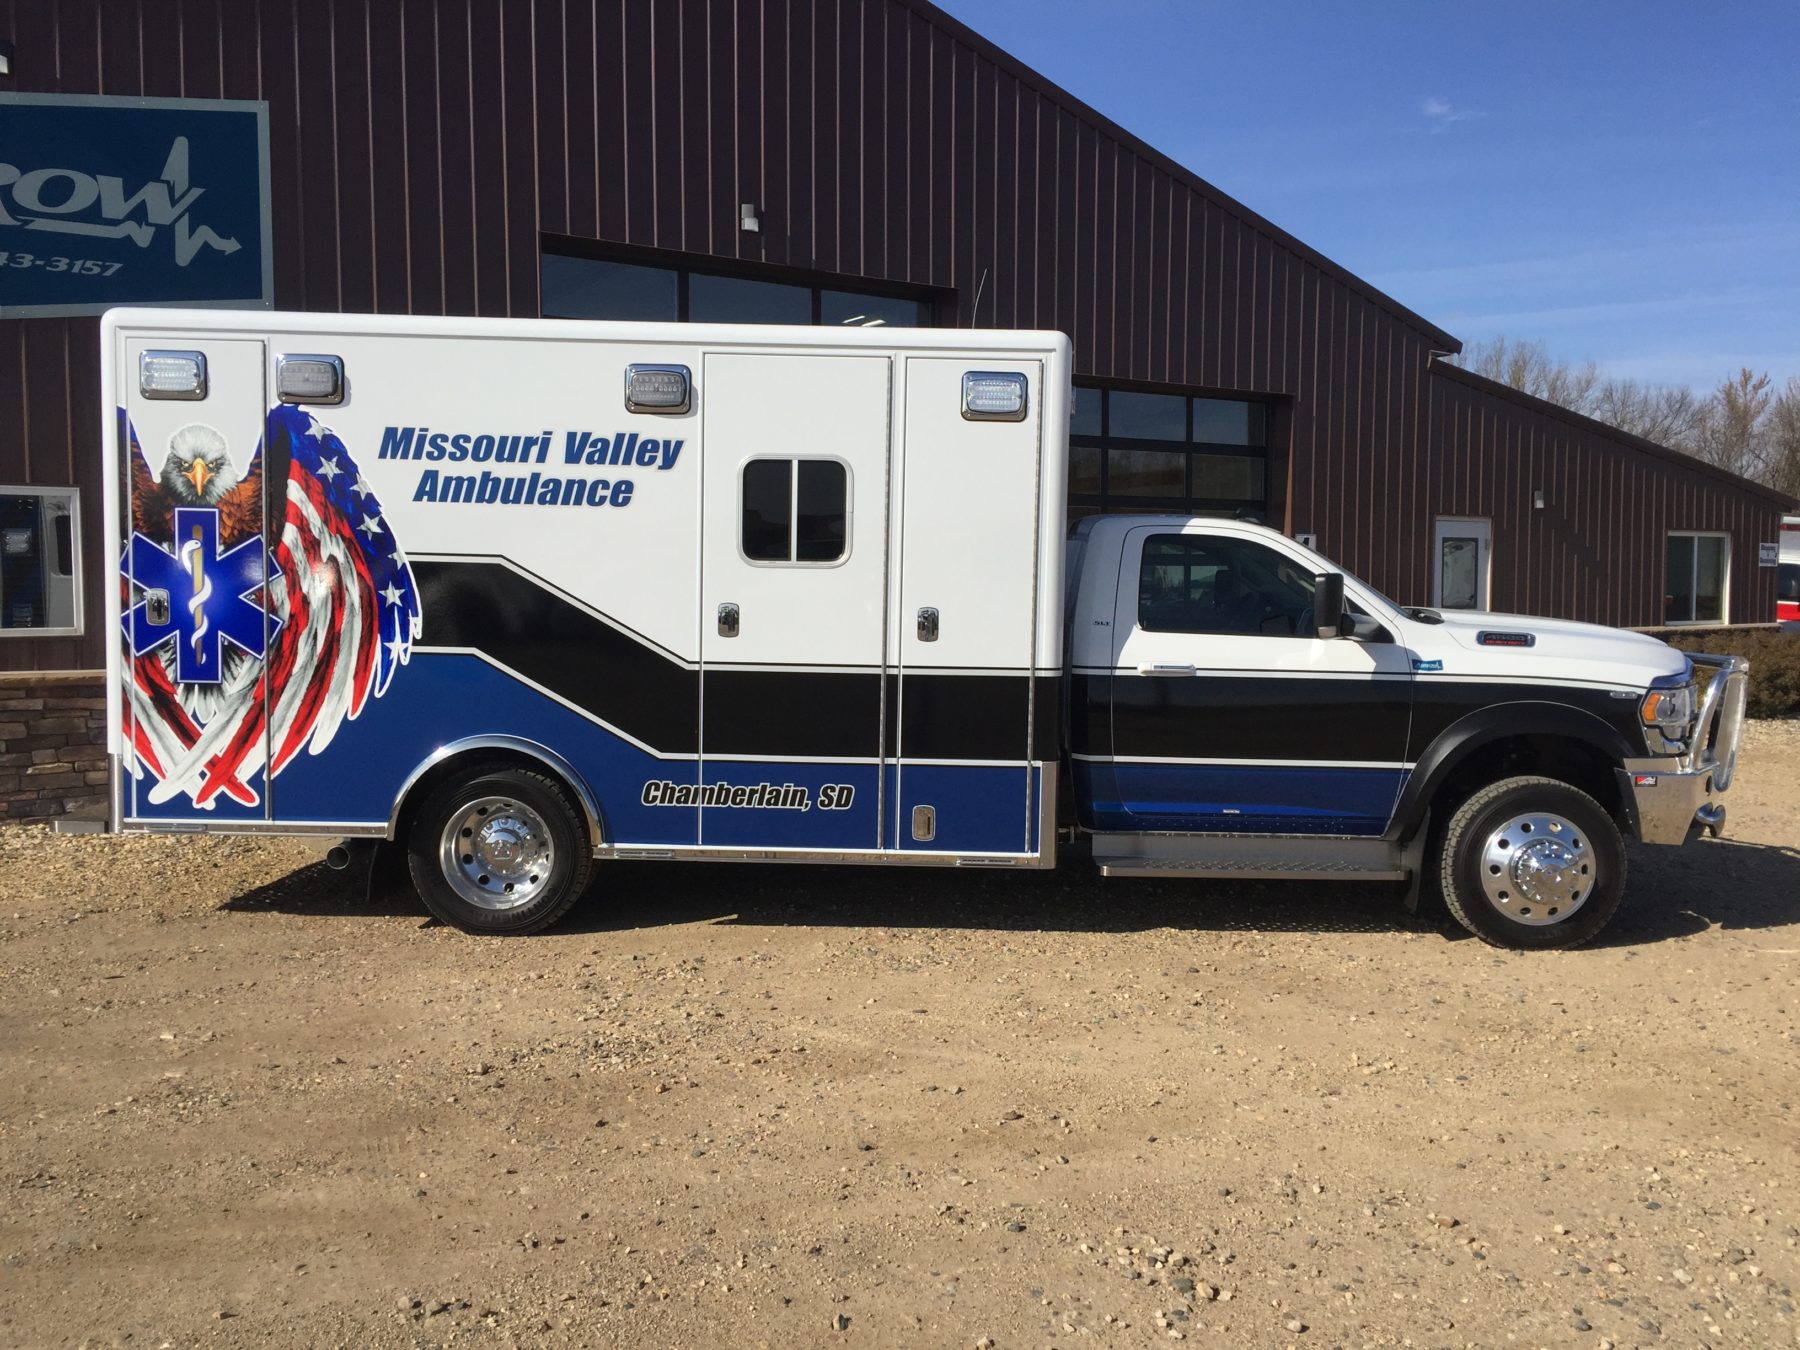 2019 Ram 4500 4x4 Heavy Duty Ambulance For Sale – Picture 4